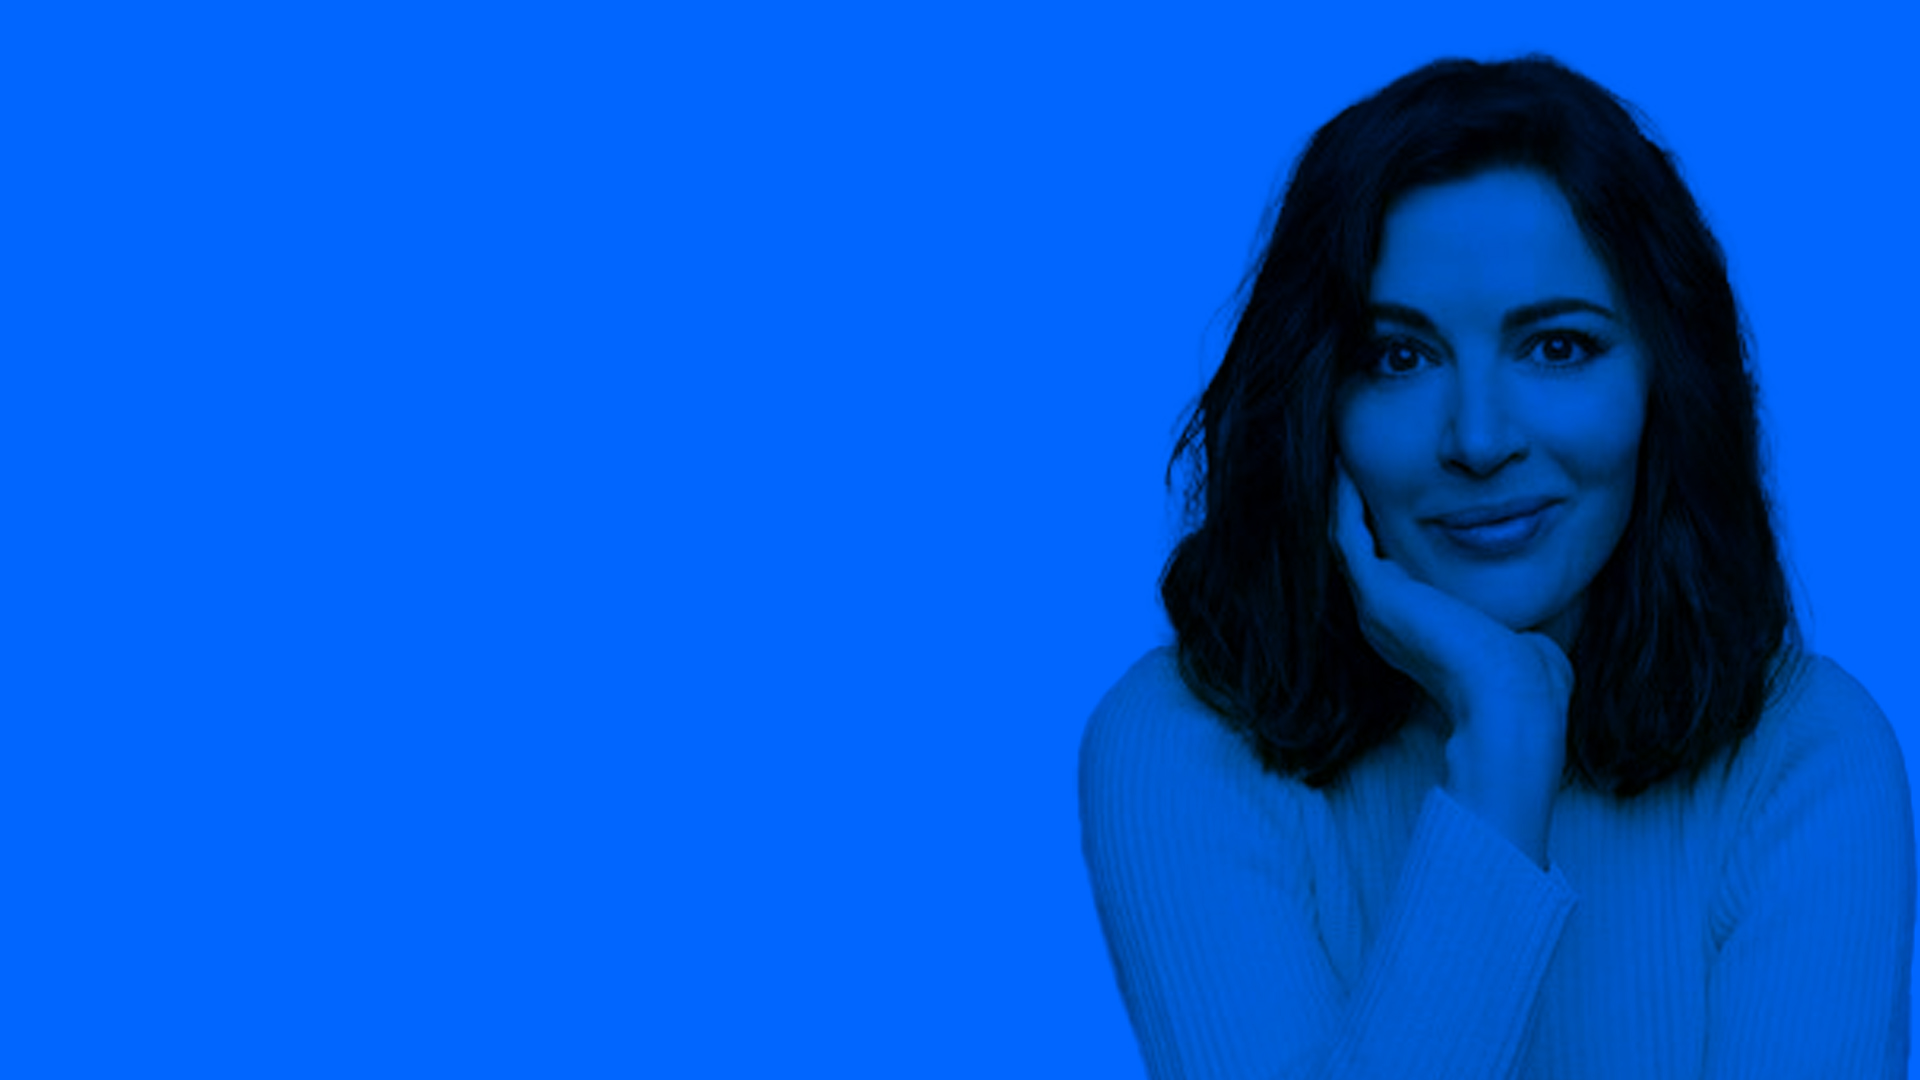 What can L&D learn from Nigella Lawson?